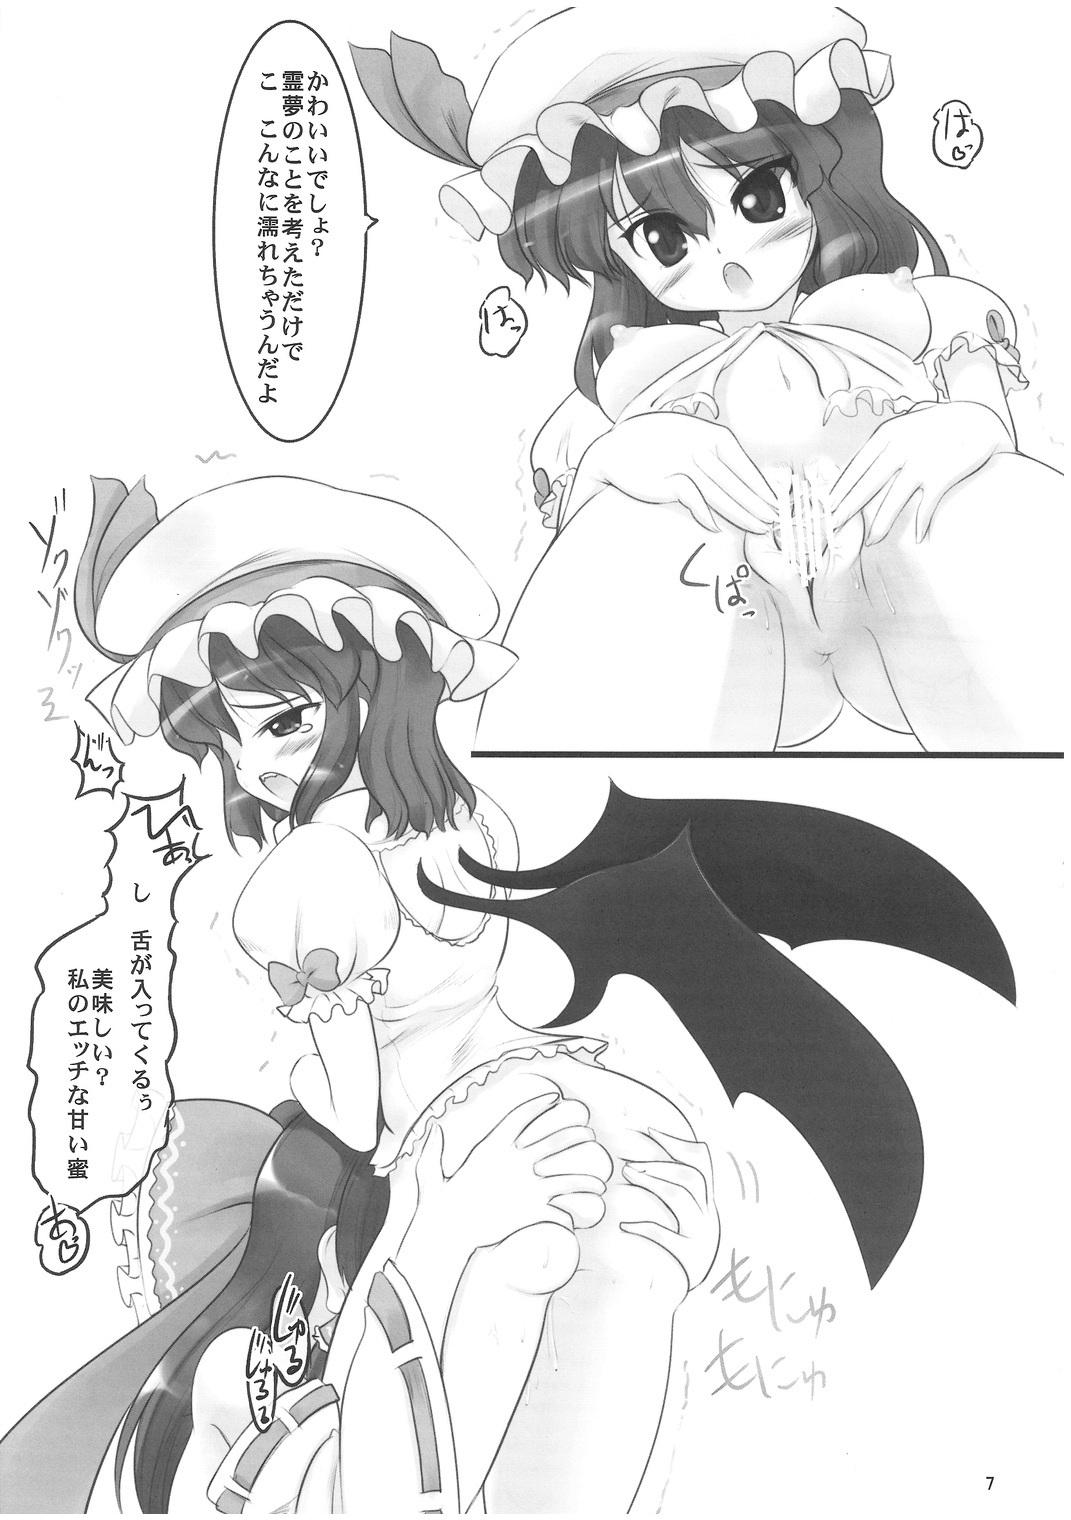 France Wing girls - Touhou project Sapphic Erotica - Page 6